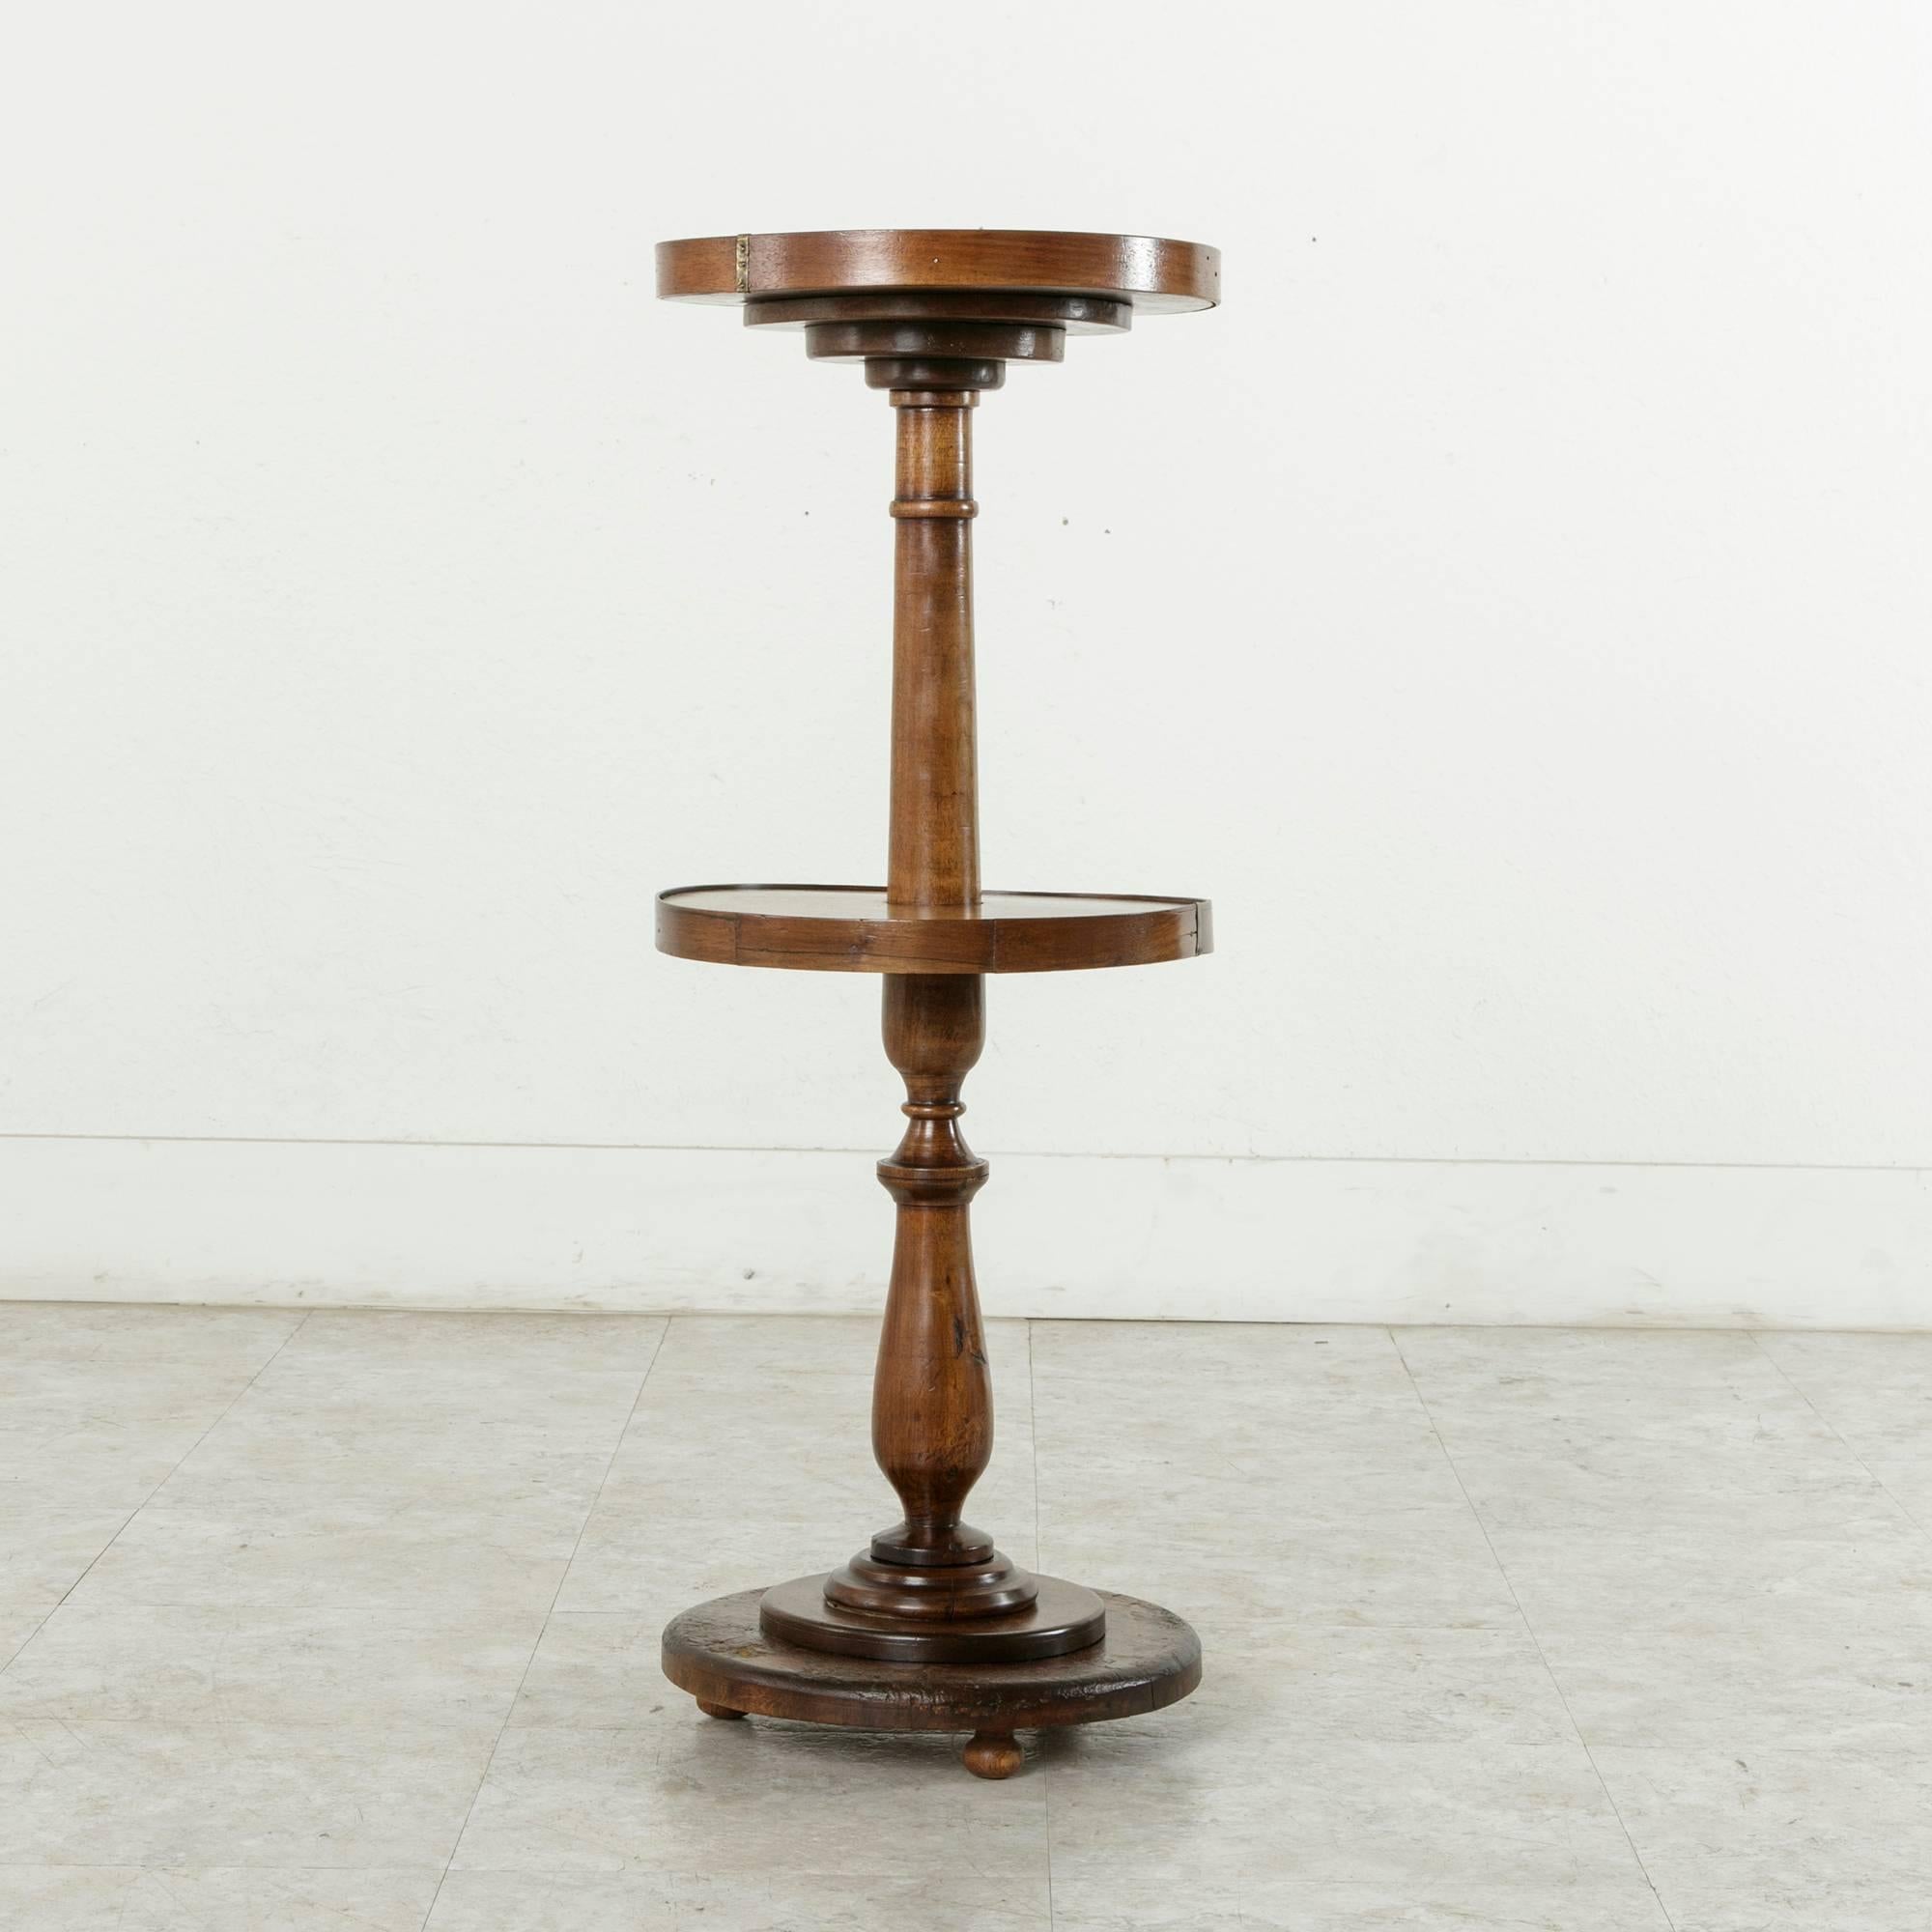 This two-tiered walnut pedestal was originally a lace maker's table in the 19th century. The lower tier turns freely and once held multiple wooden bobbins used by the lace maker. She would turn the table platform to the bobbin of thread needed as